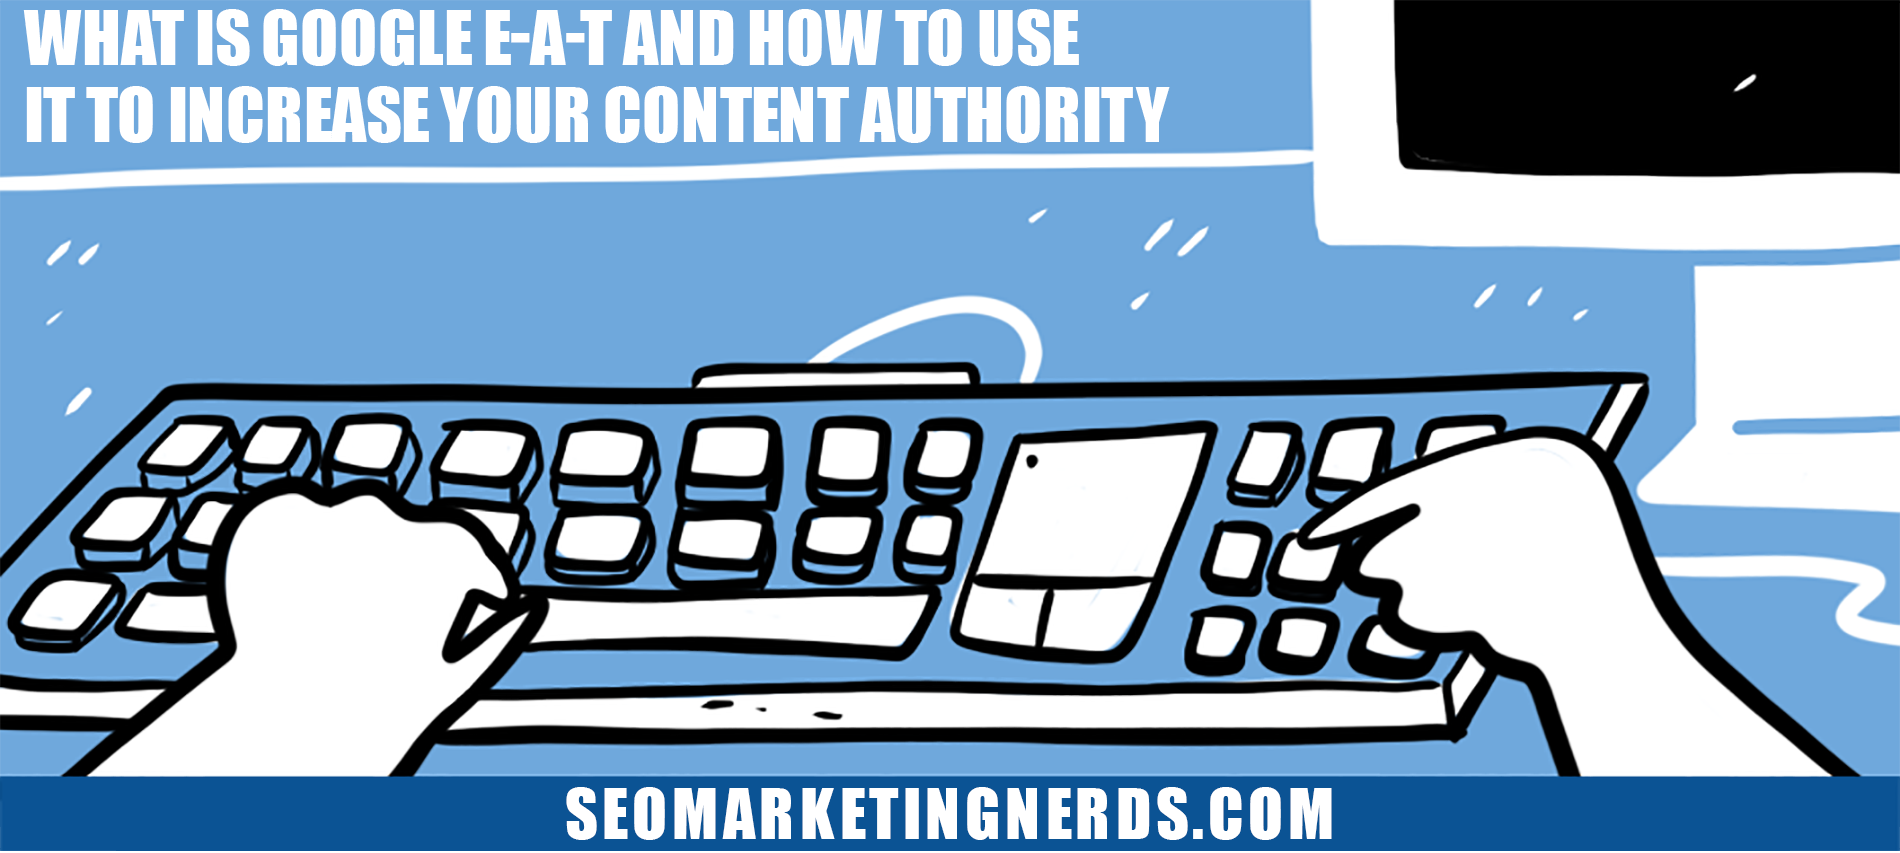 What Is Google E-A-T And How To Use It To Increase Your Content Authority